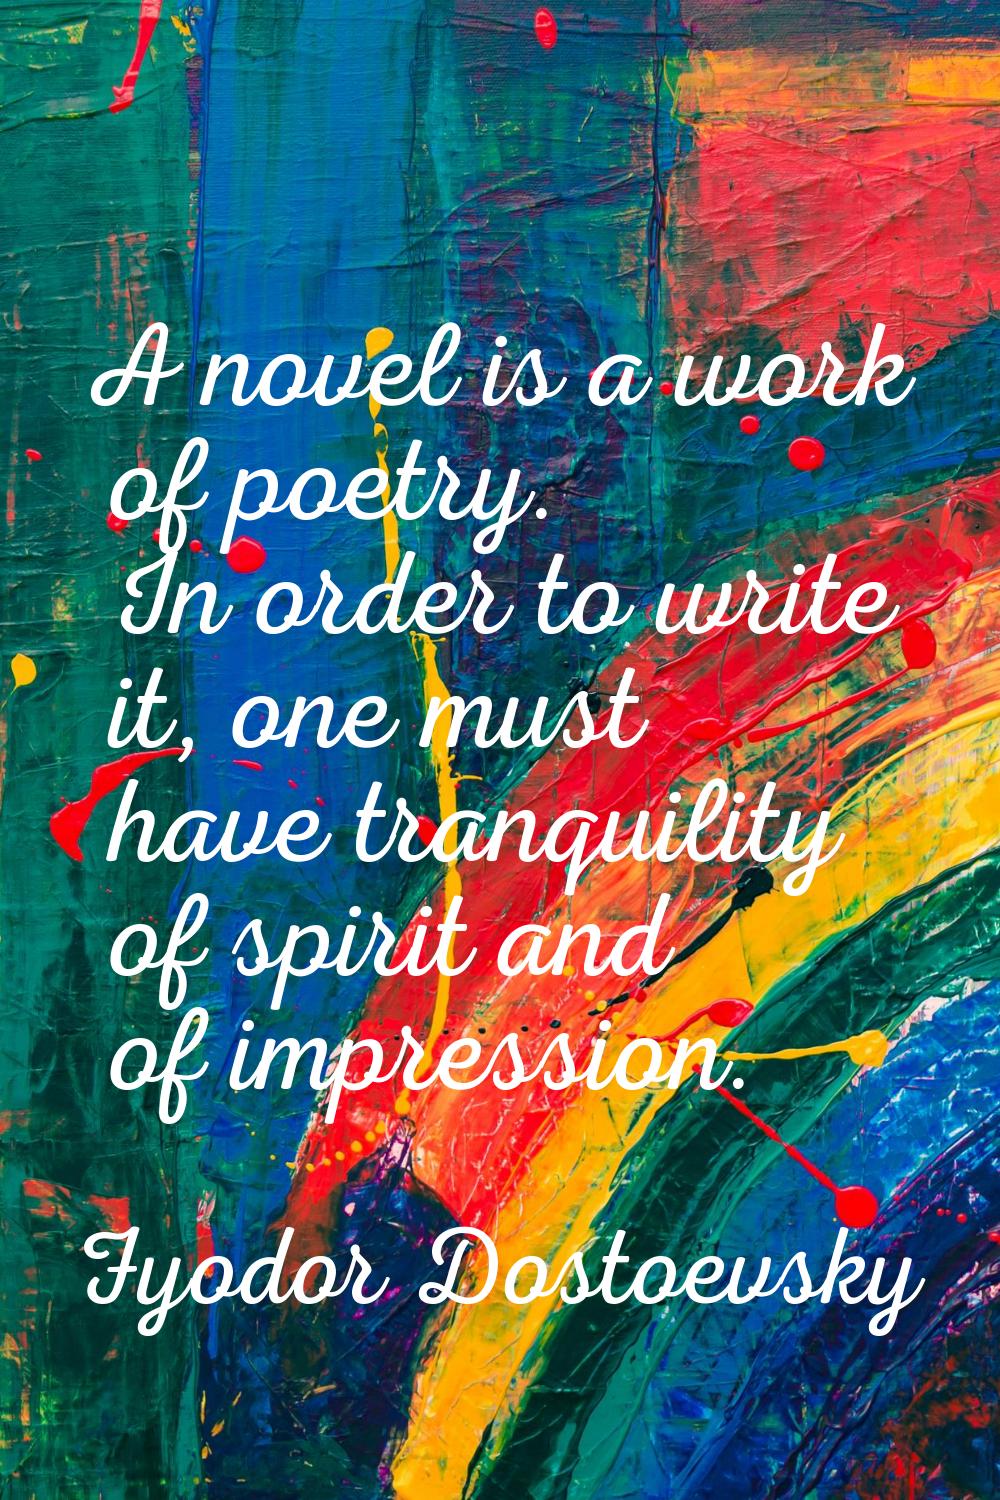 A novel is a work of poetry. In order to write it, one must have tranquility of spirit and of impre